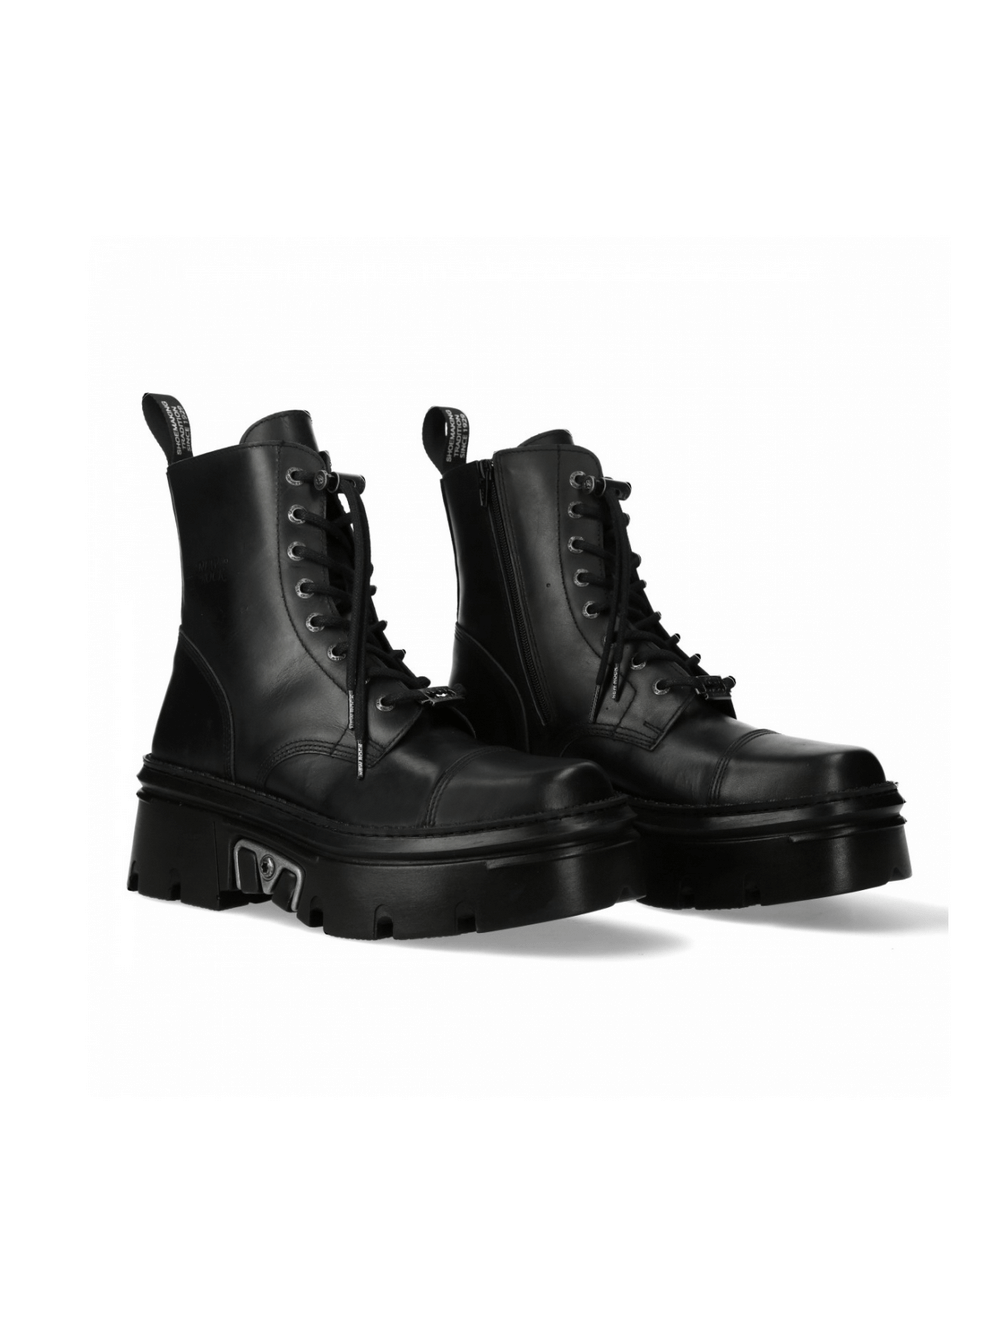 NEW ROCK Punk Style Leather Ankle Boots with Platform